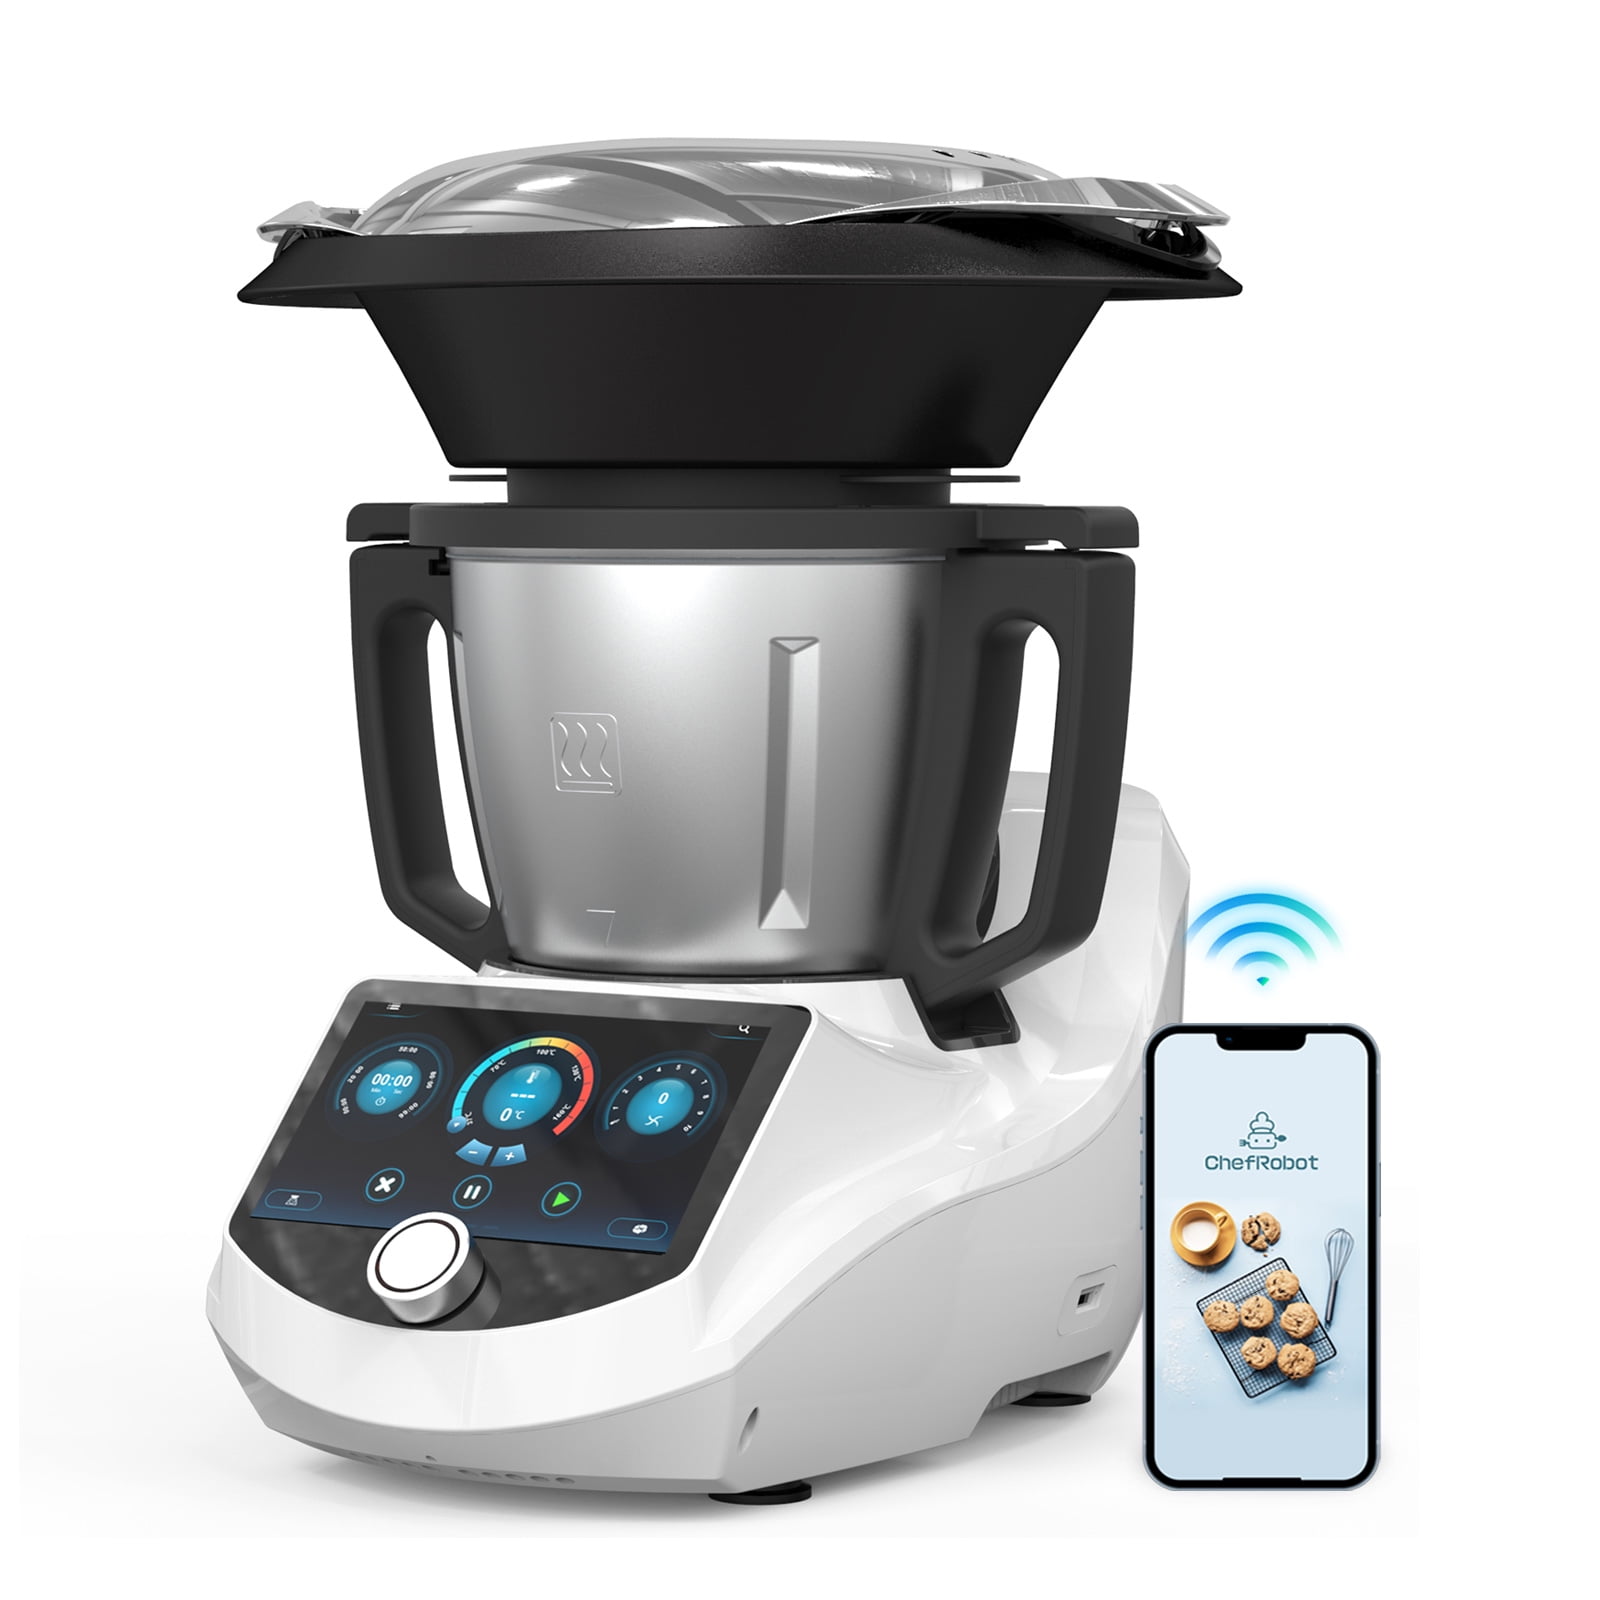 ChefRobot 3.7-Quart Smart Food Processor, Multi-Cooker for Sous Vide, Chop,  Steam, Knead and More